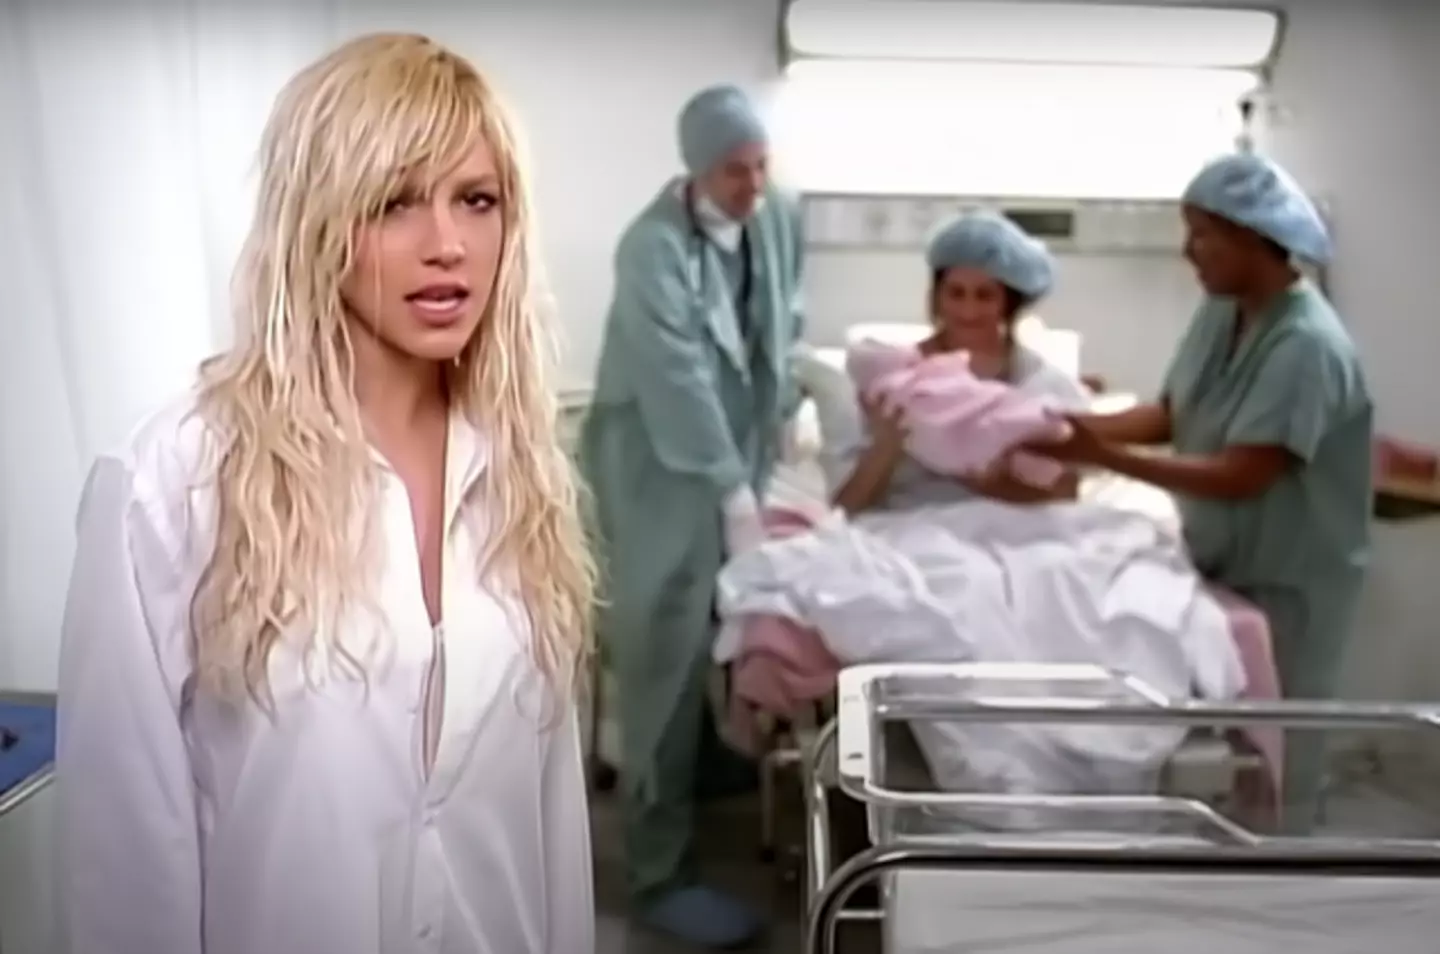 The music video depicts a woman giving birth.